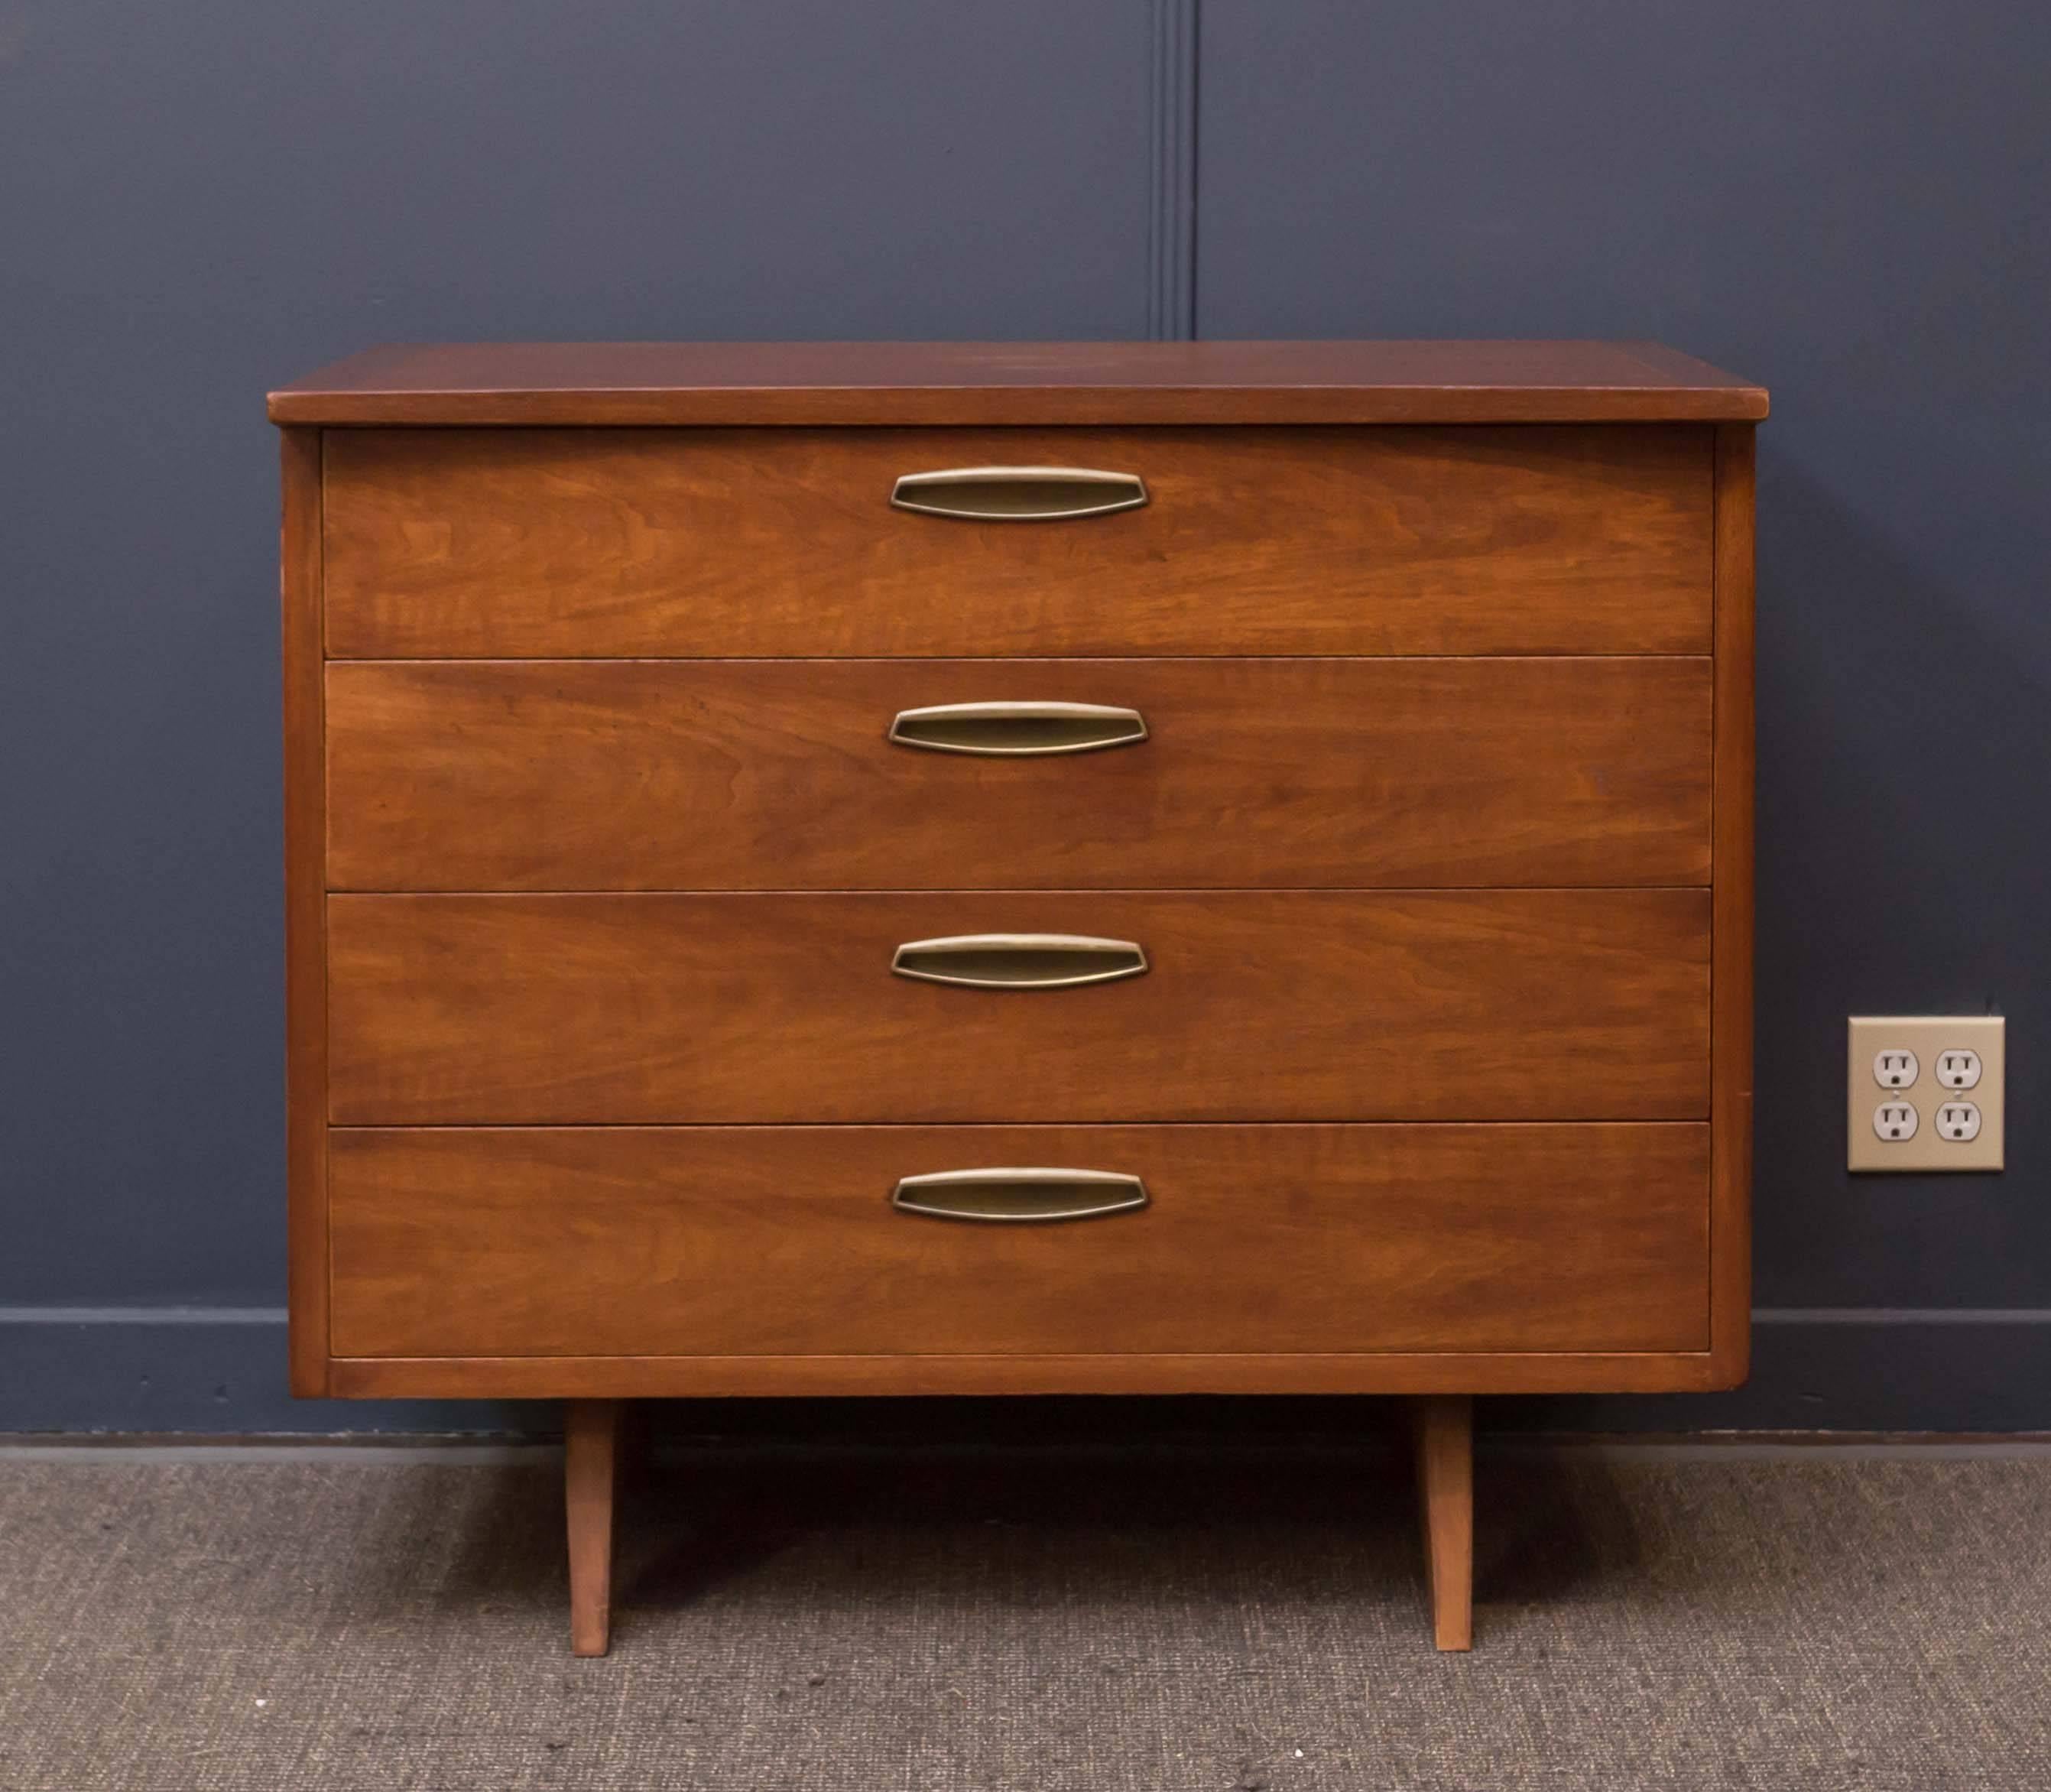 Available at DeAngelis a wonderful George Nakashima design chest or dresser from his "Origins" line for Widdicomb Furniture co.